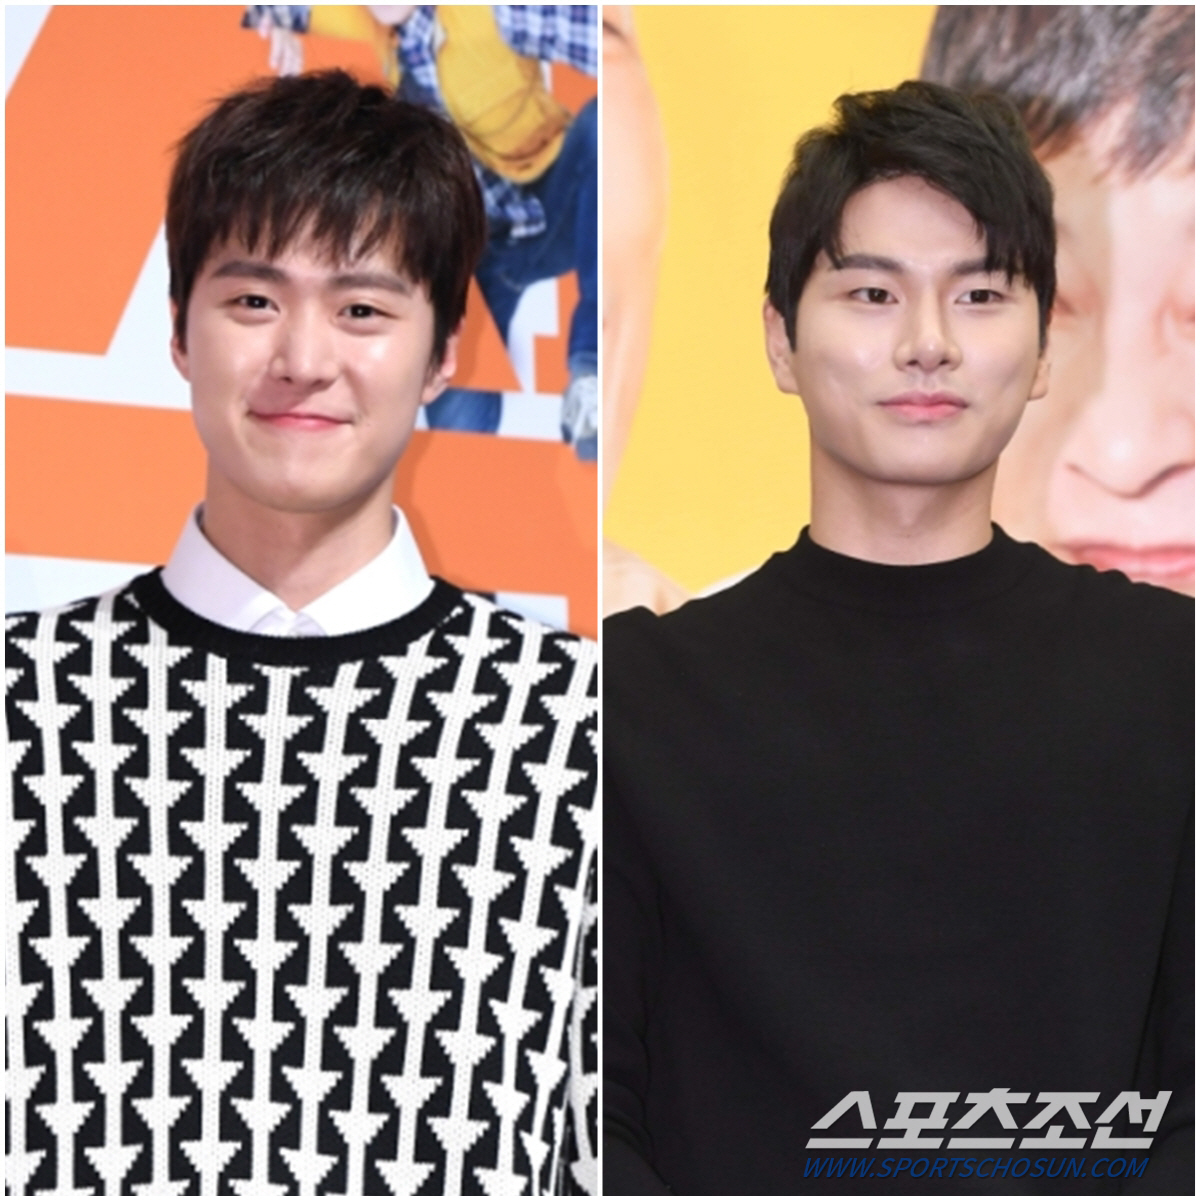 gong-myung-and-lee-yi-kyung-considers-casting-offers-for-comedy-6-45-2